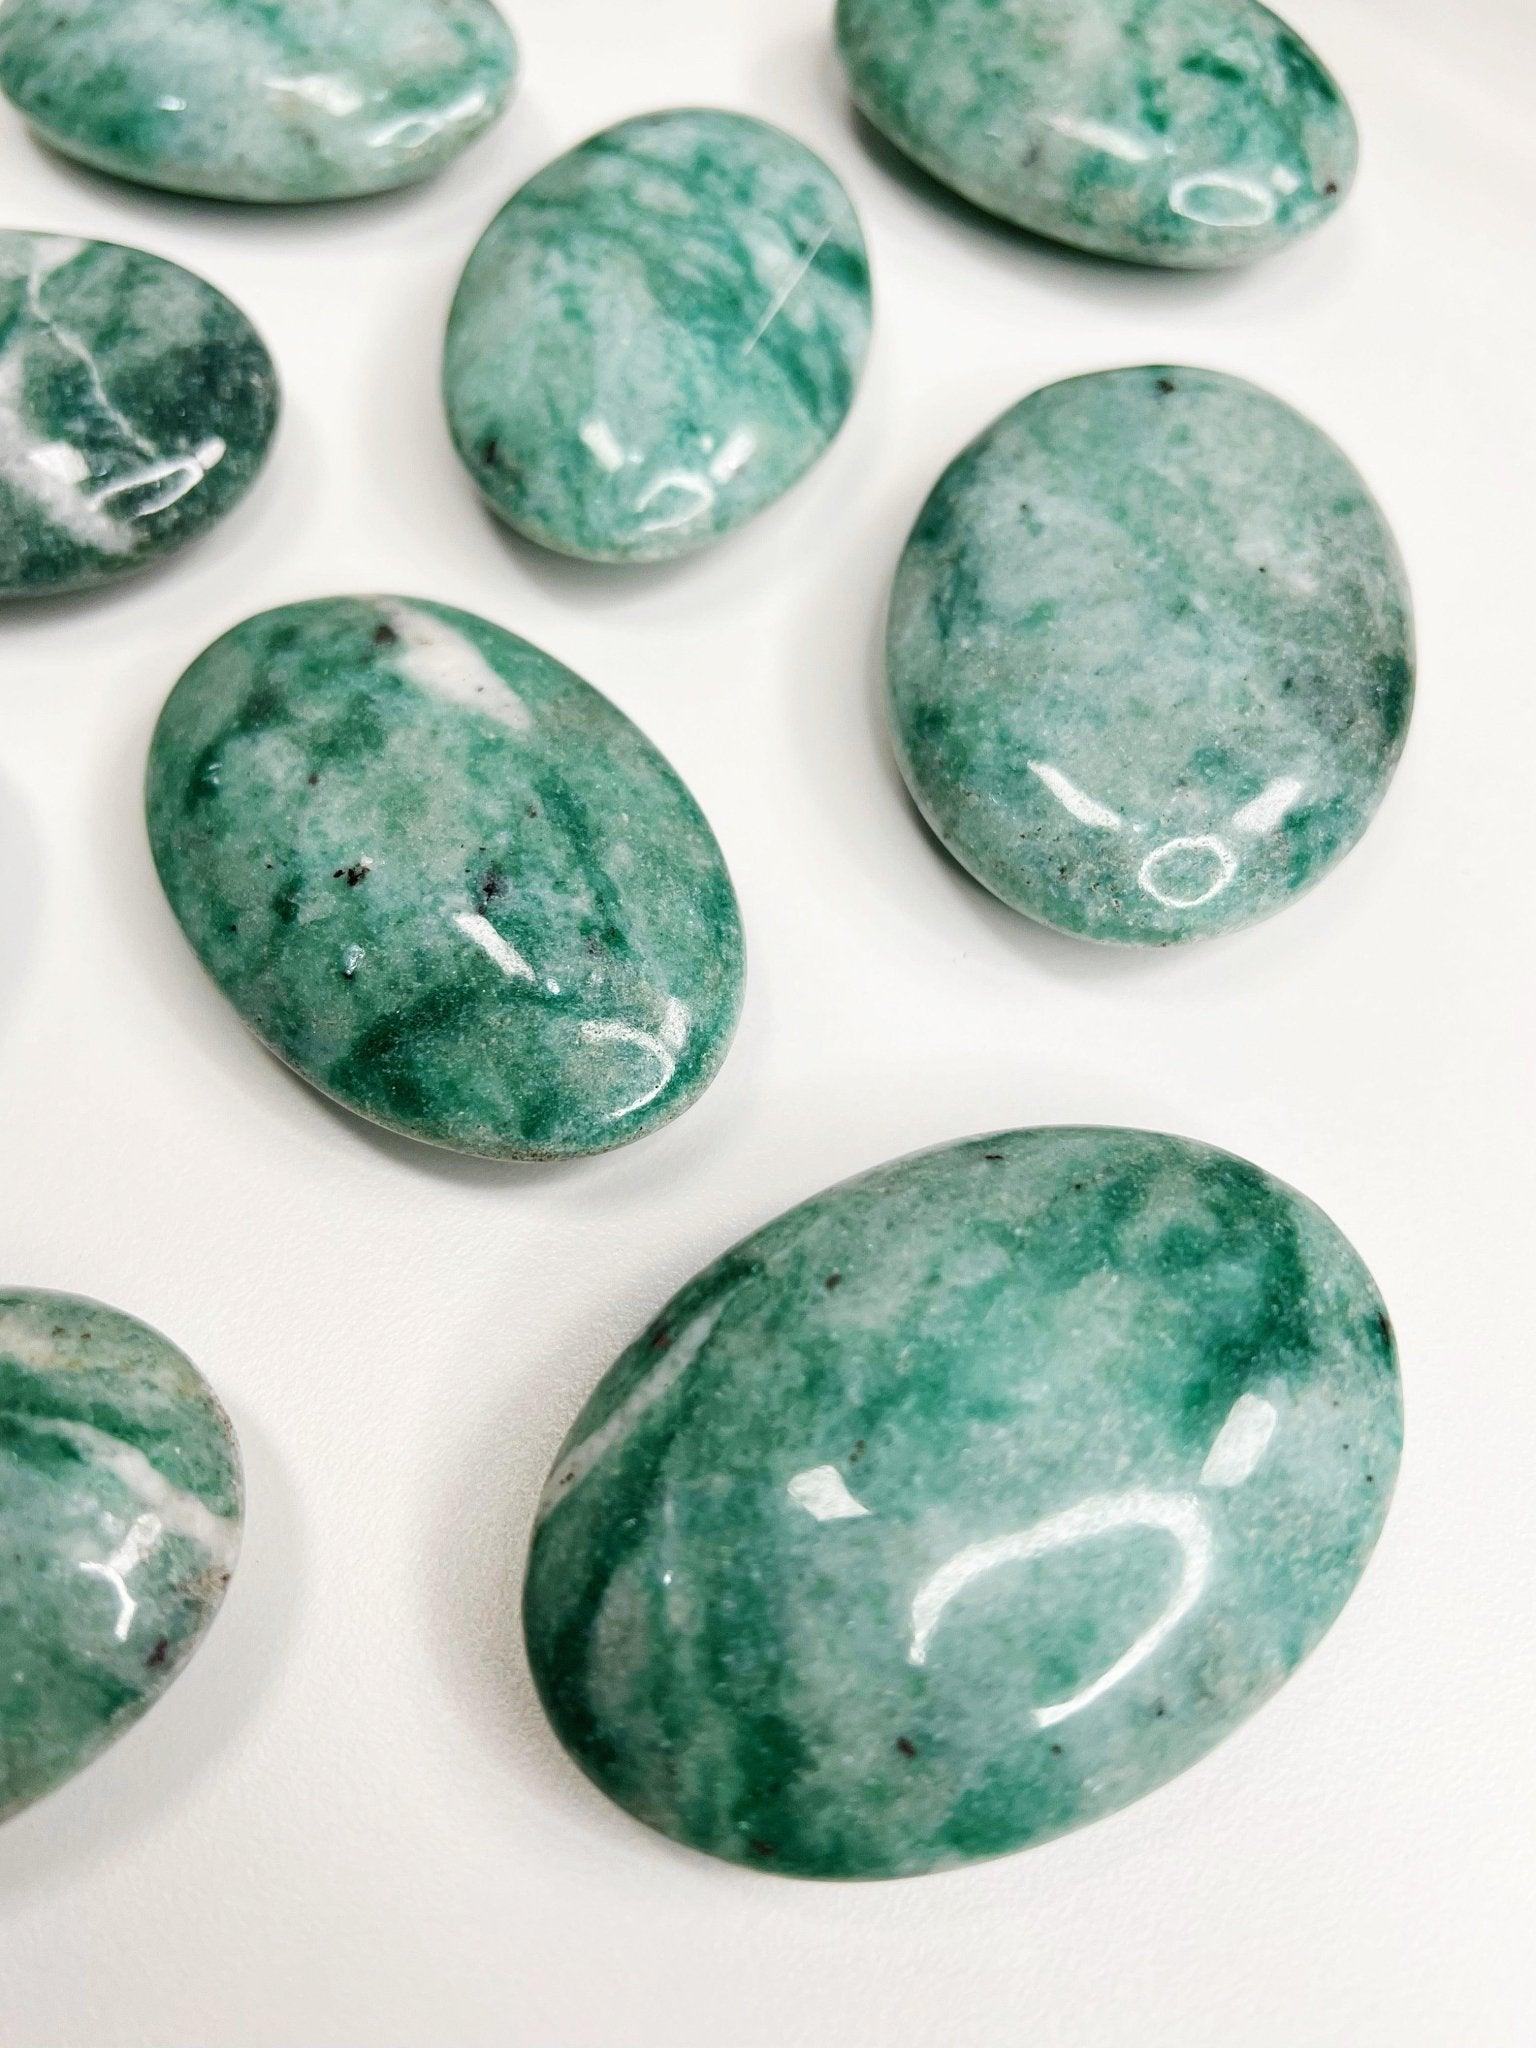 FUCHSITE PALM STONE - 33 bday, 444 sale, end of year sale, holiday sale, new year sale, palm, palm stone, palmstone - The Mineral Maven